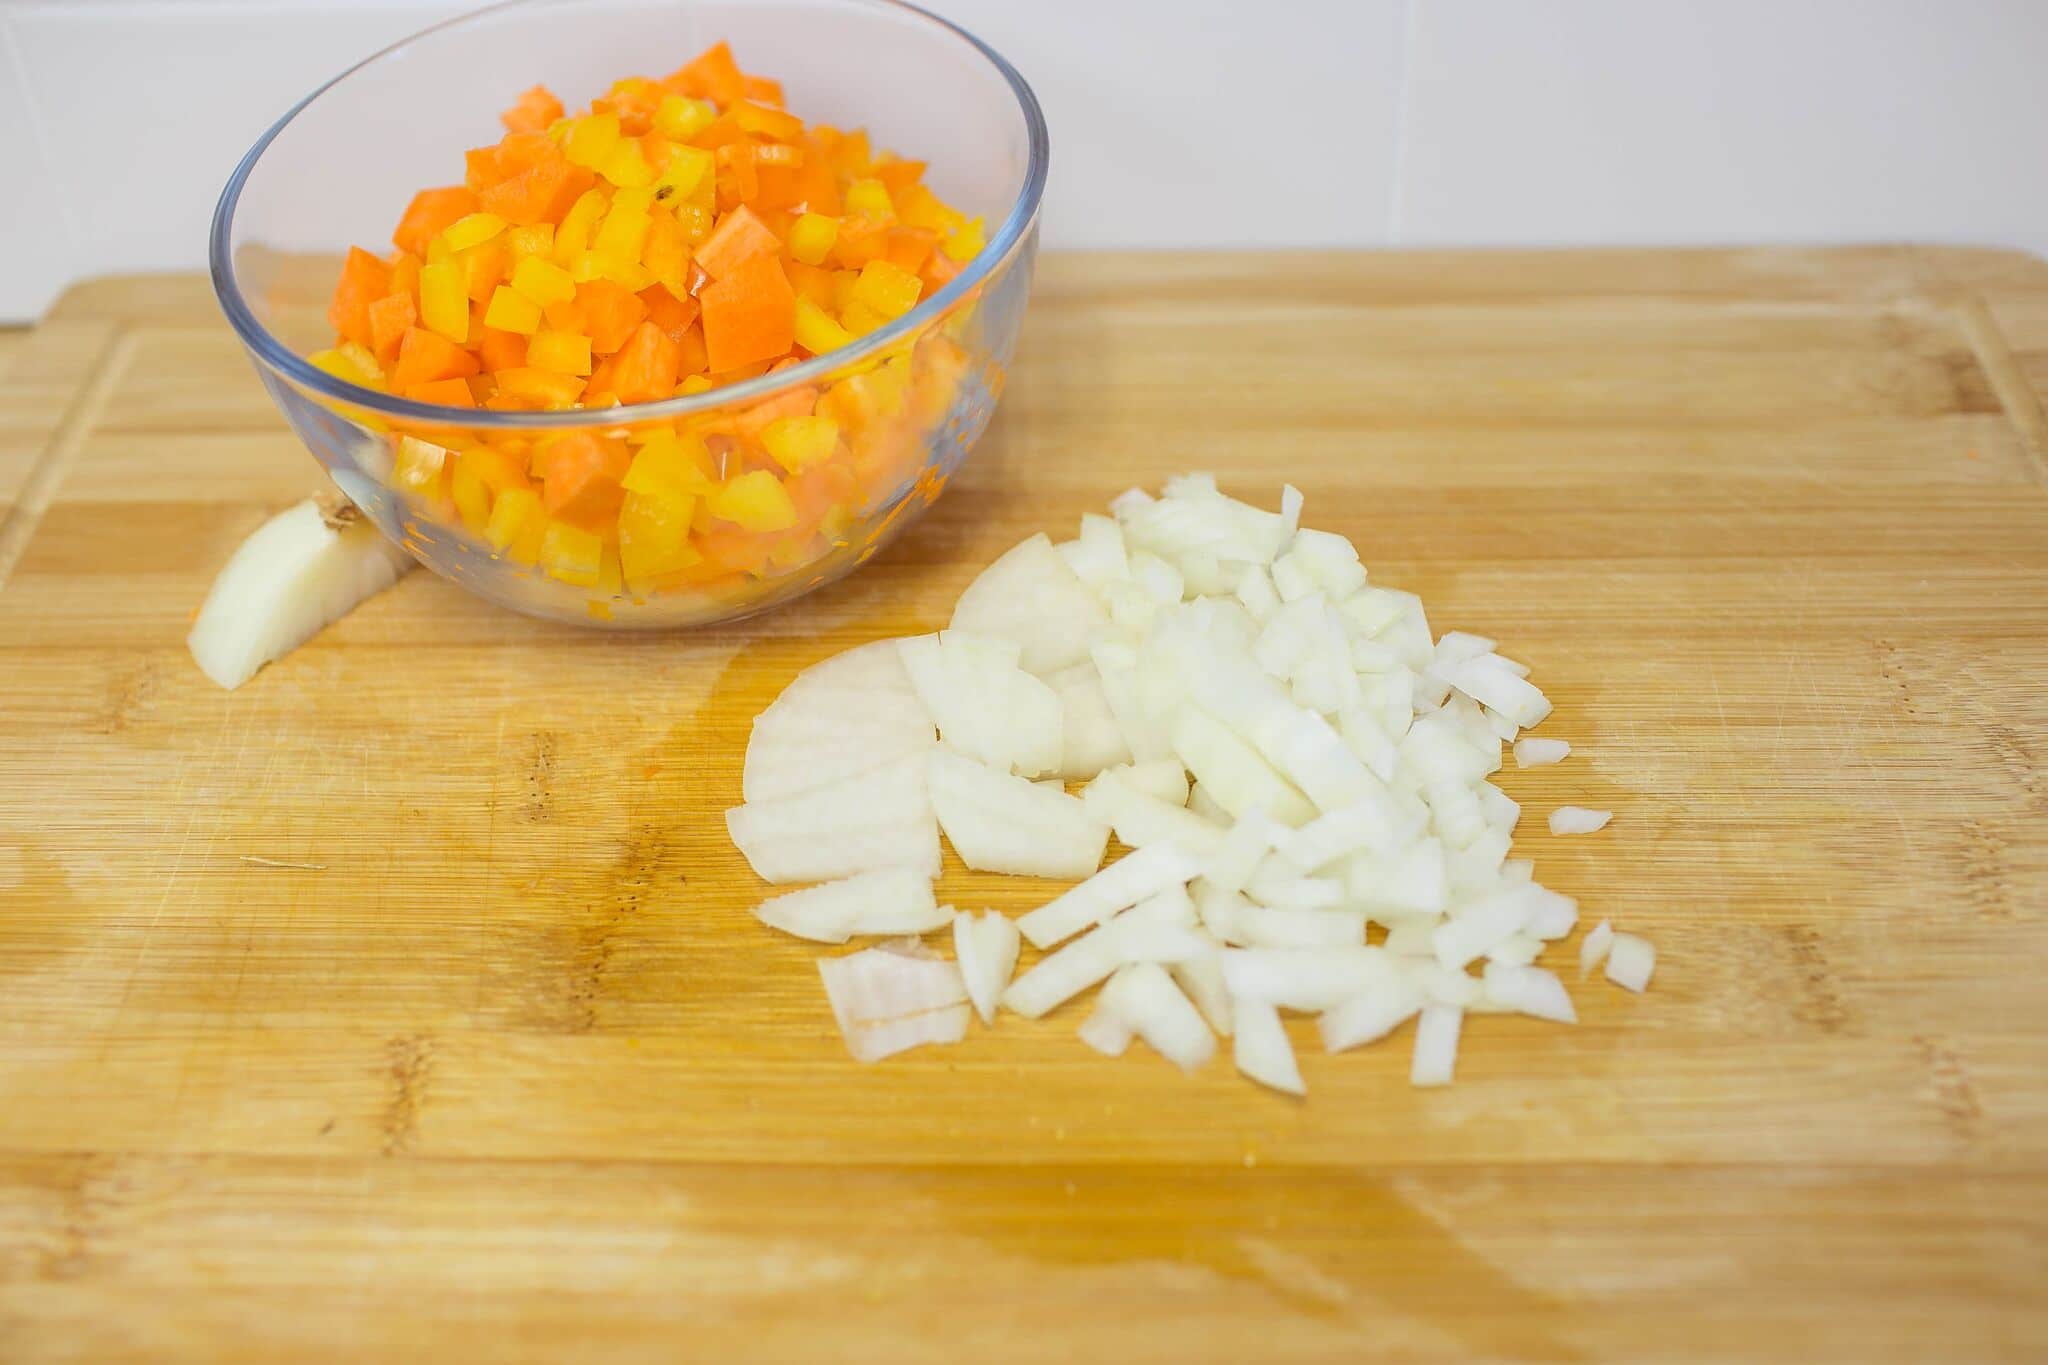 Dice onions and set aside with peppers and carrots